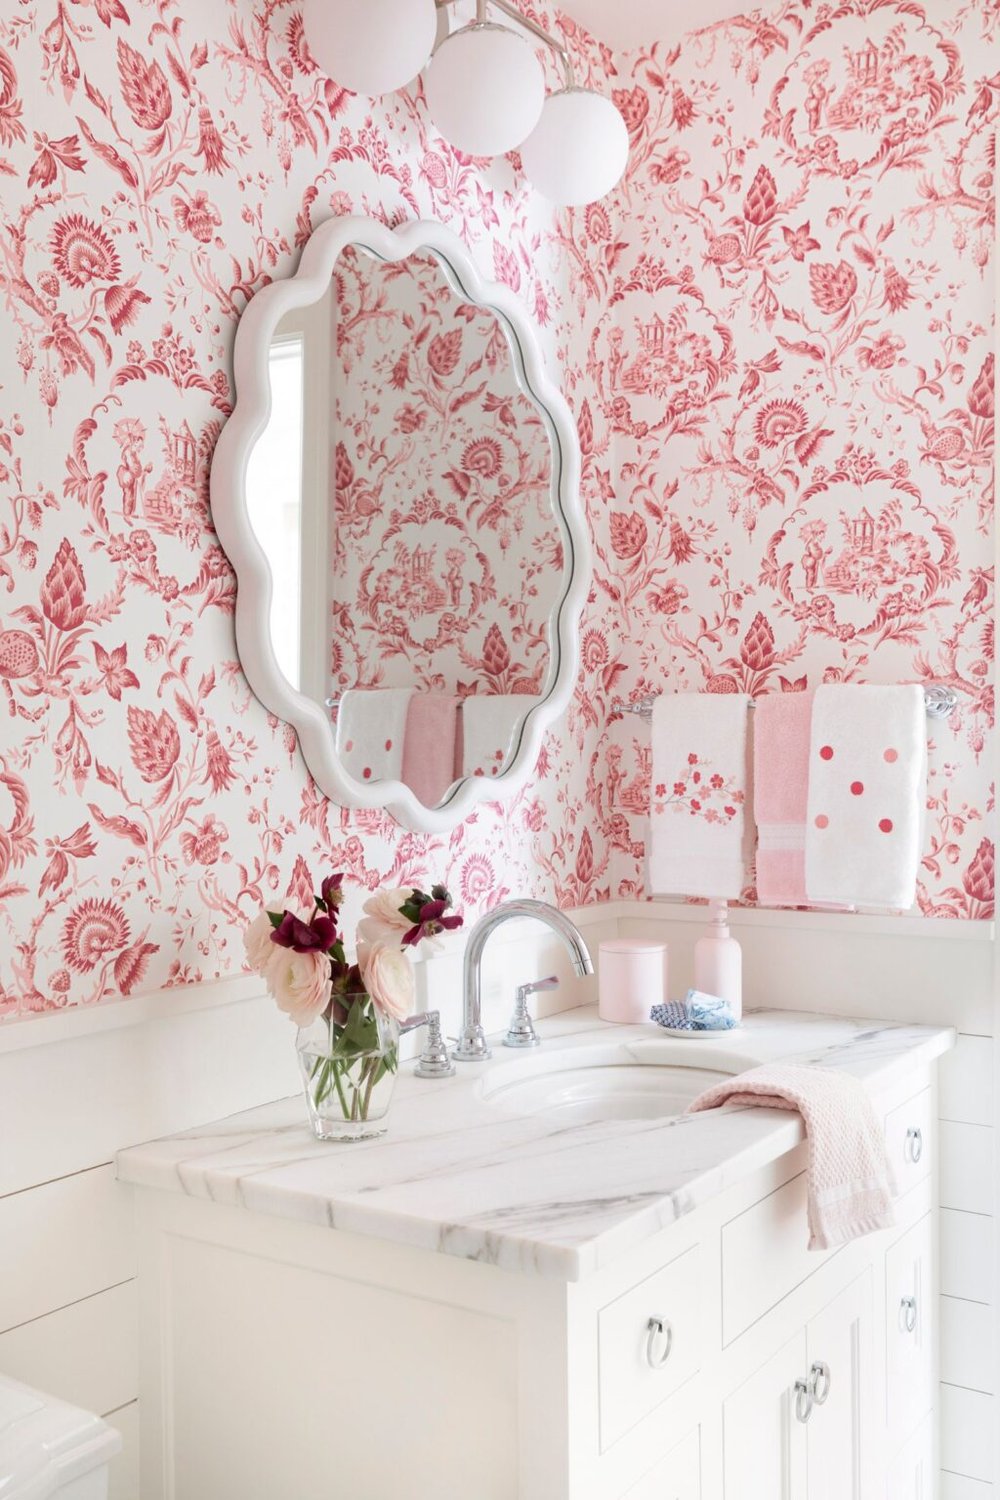 Magenta brings sexy to this glam master suite